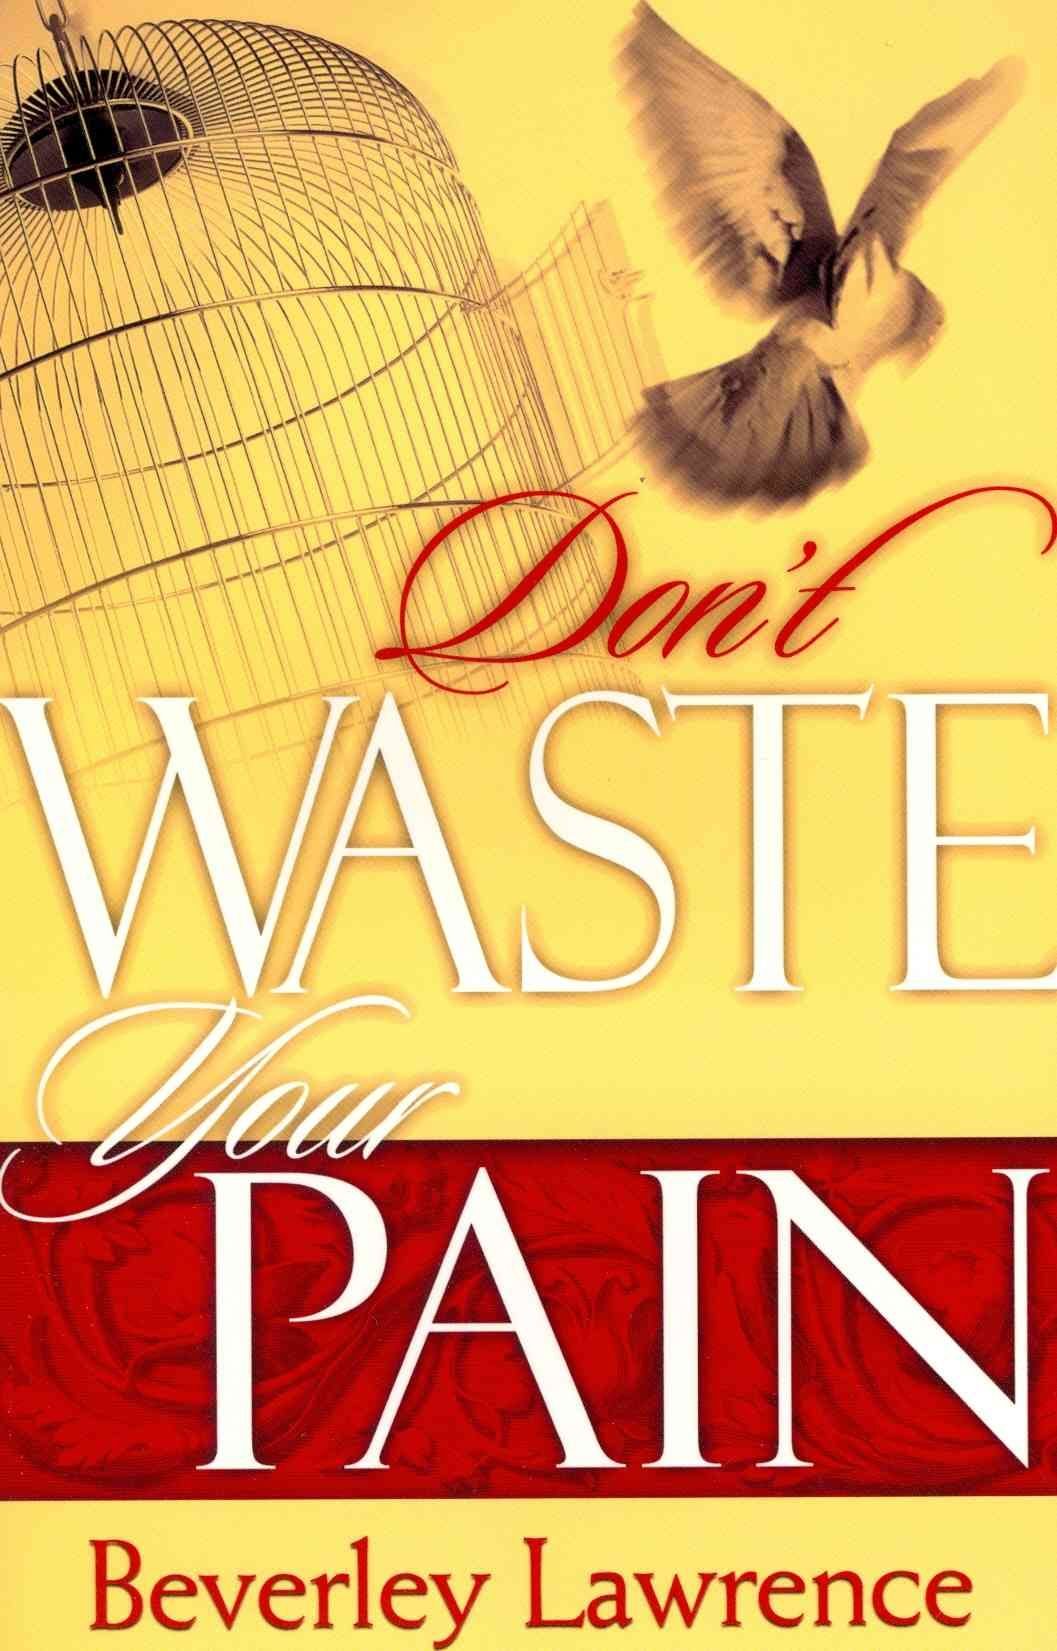 Don't Waste Your Pain